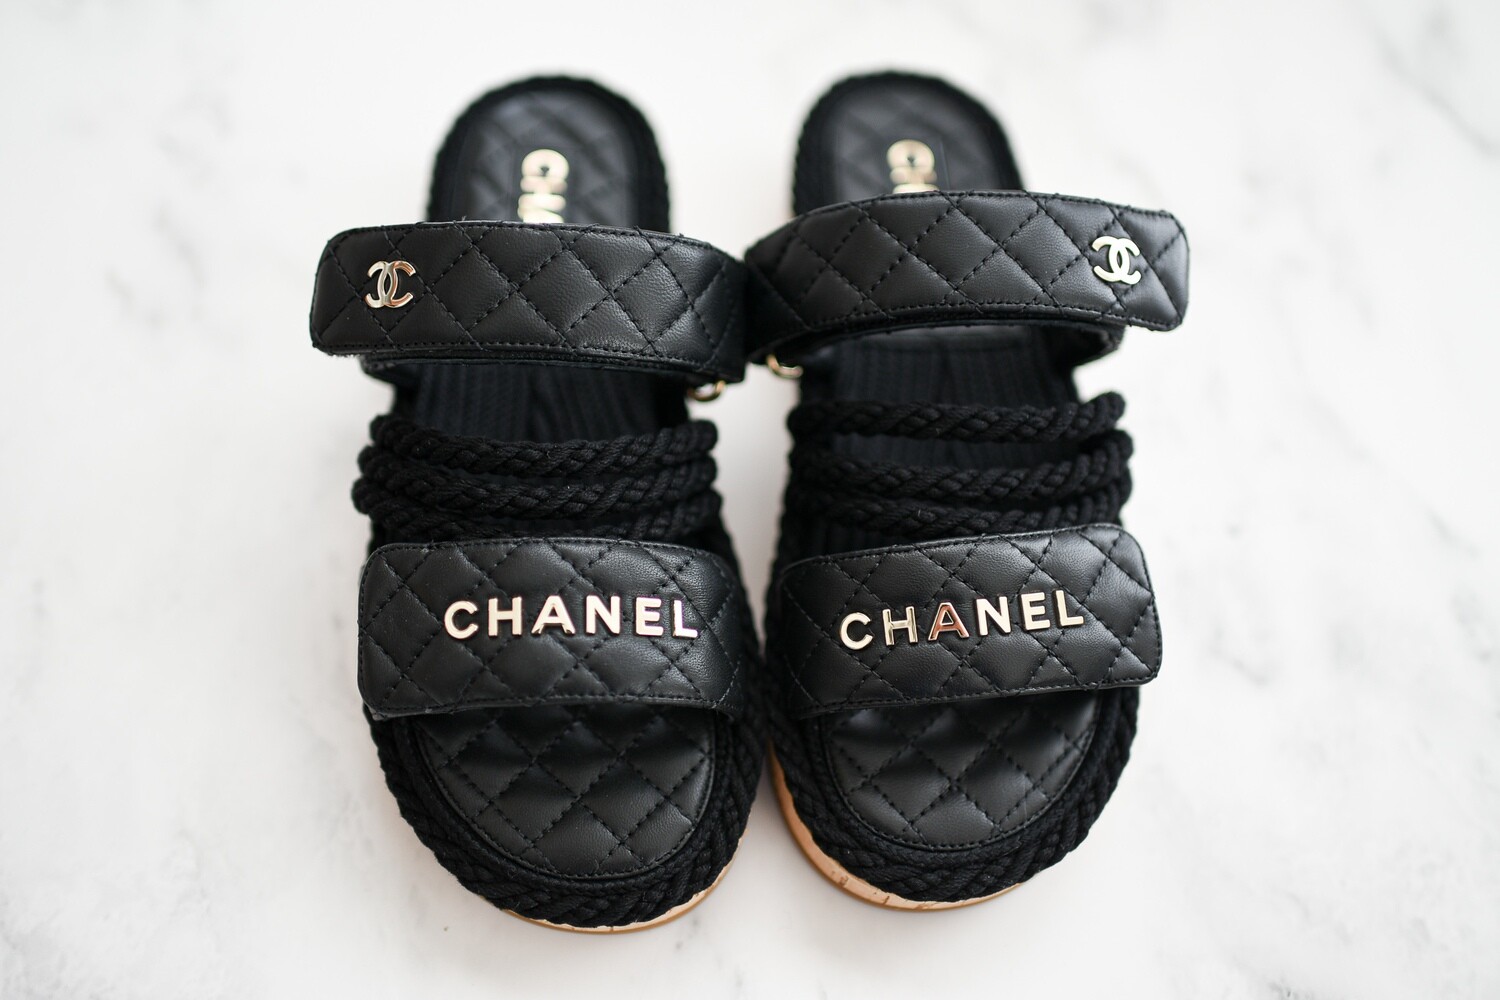 Chanel Rope Sandals, Black, Size 37, New in Box GA001